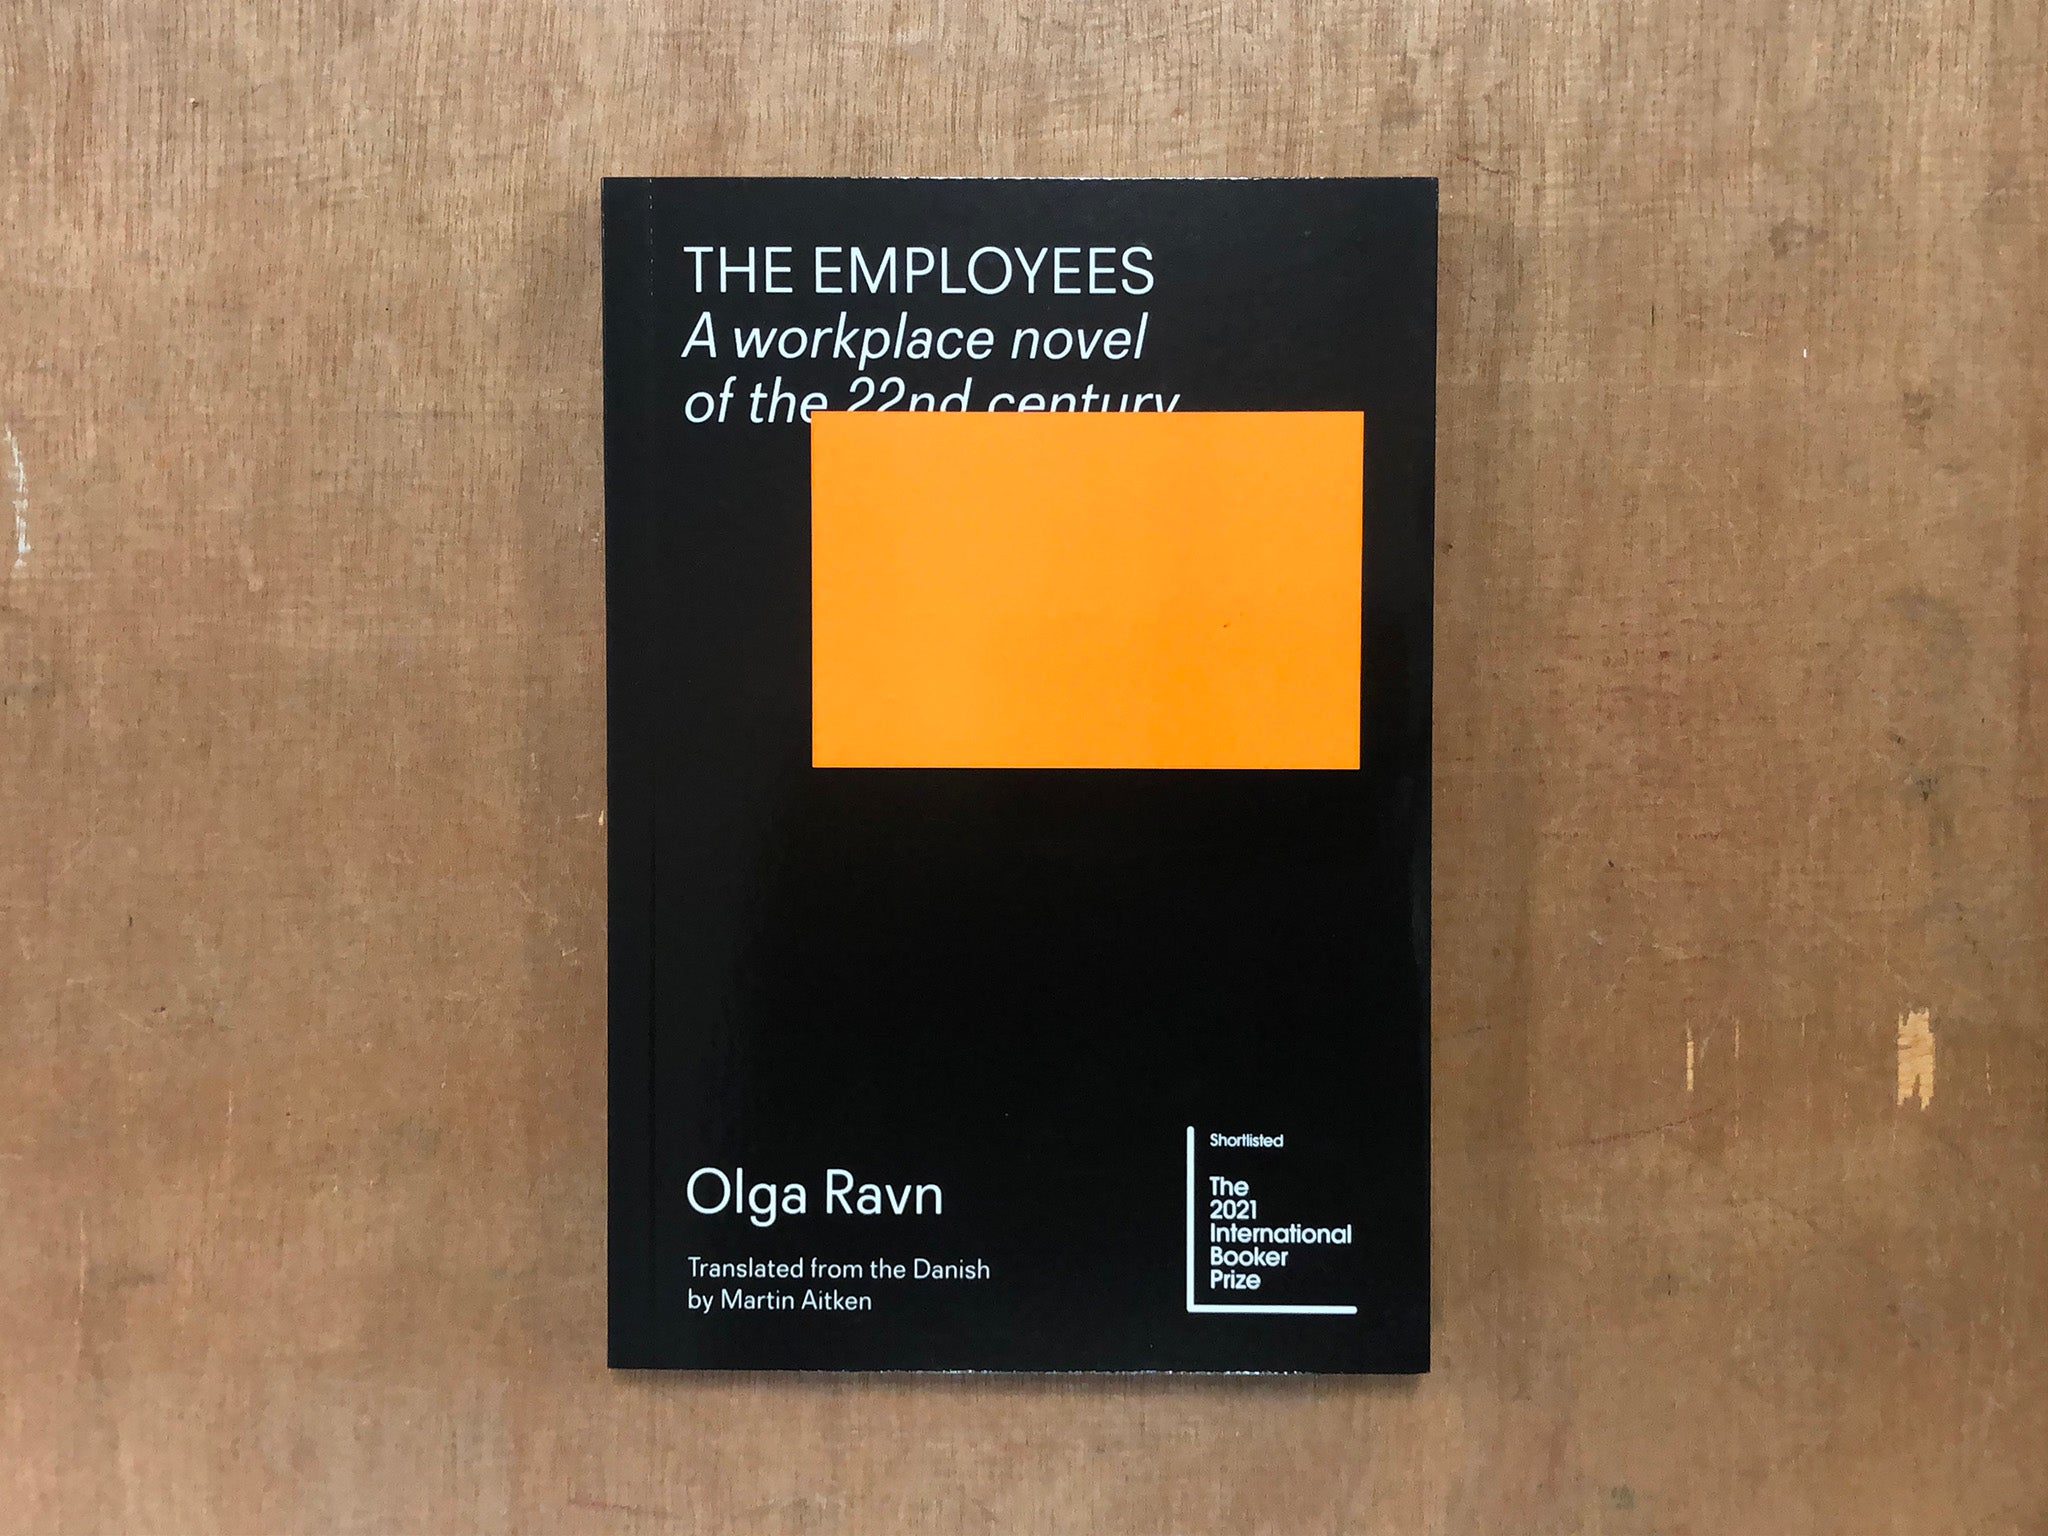 THE EMPLOYEES, A WORKPLACE NOVEL OF THE 22ND CENTURY by Olga Ravn